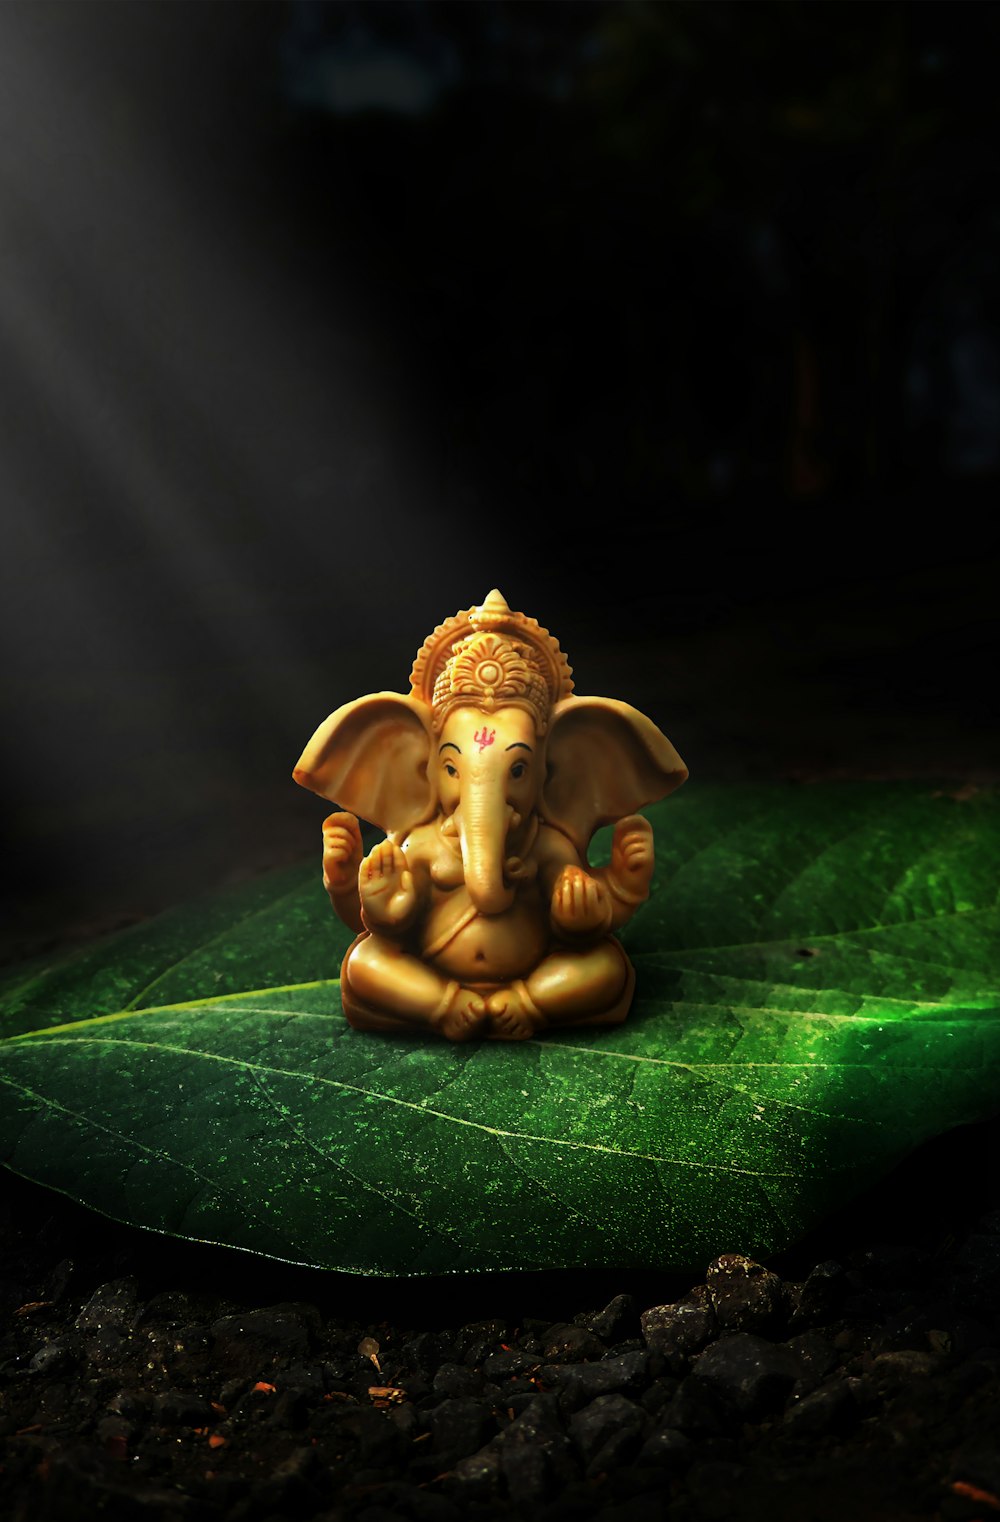 Huge Compilation of 999+ Gorgeous Ganesh Chaturthi Wallpapers in 4K Resolution